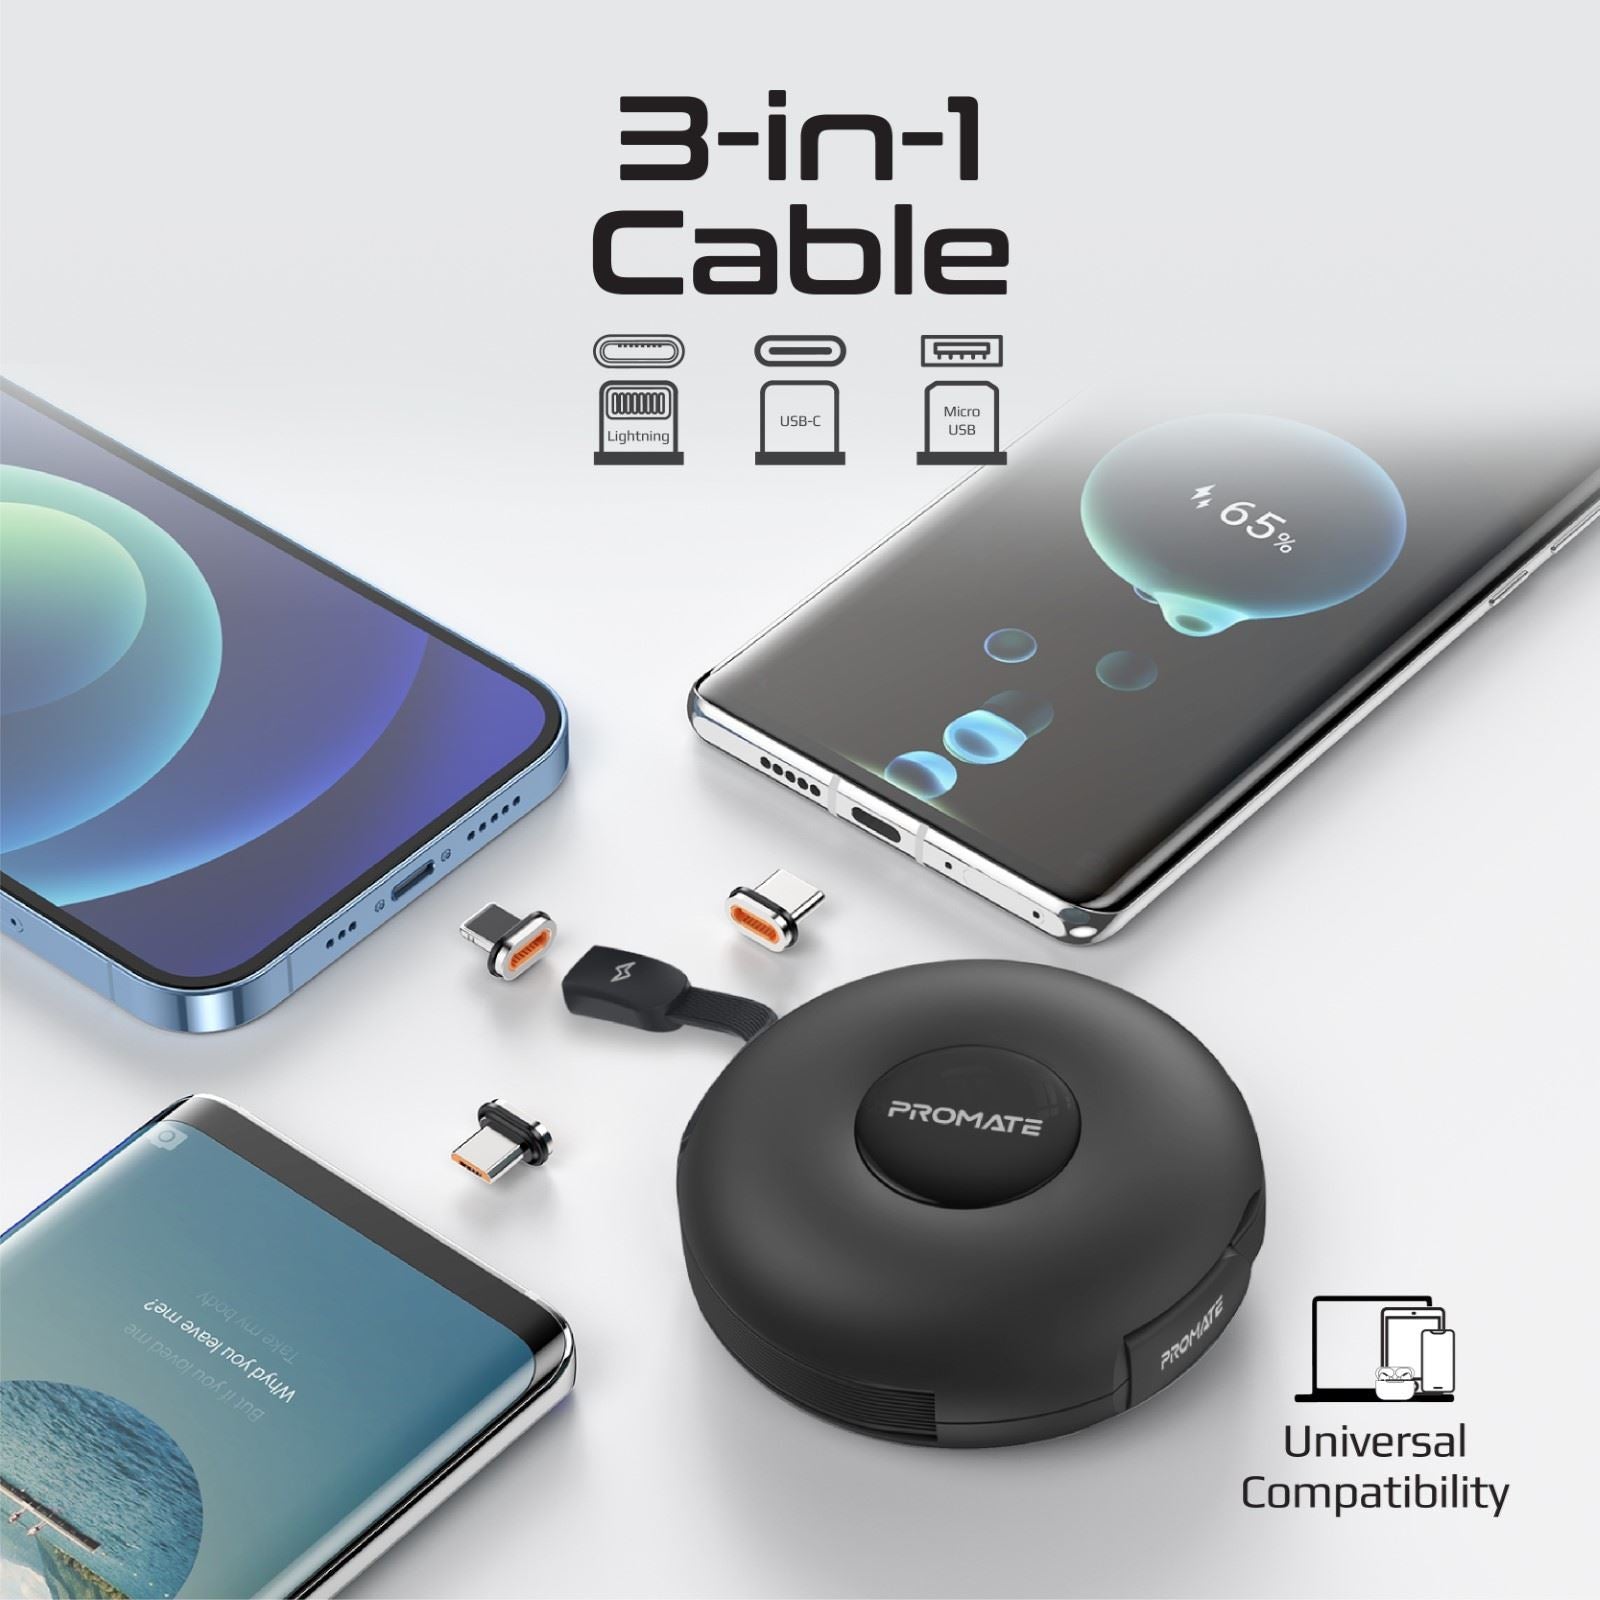 PROMATE_3in1_USB-C_Retractable_Data_&_Charge_Cable_with_Changeable_Magnetic_Connectors._Includes_USB-C_Micro-USB_&_Lightning_Connectors._Supports_60W_USB-C_&_20W_Lightning_PD,_Auto_Recoil._Black_Colour 1739